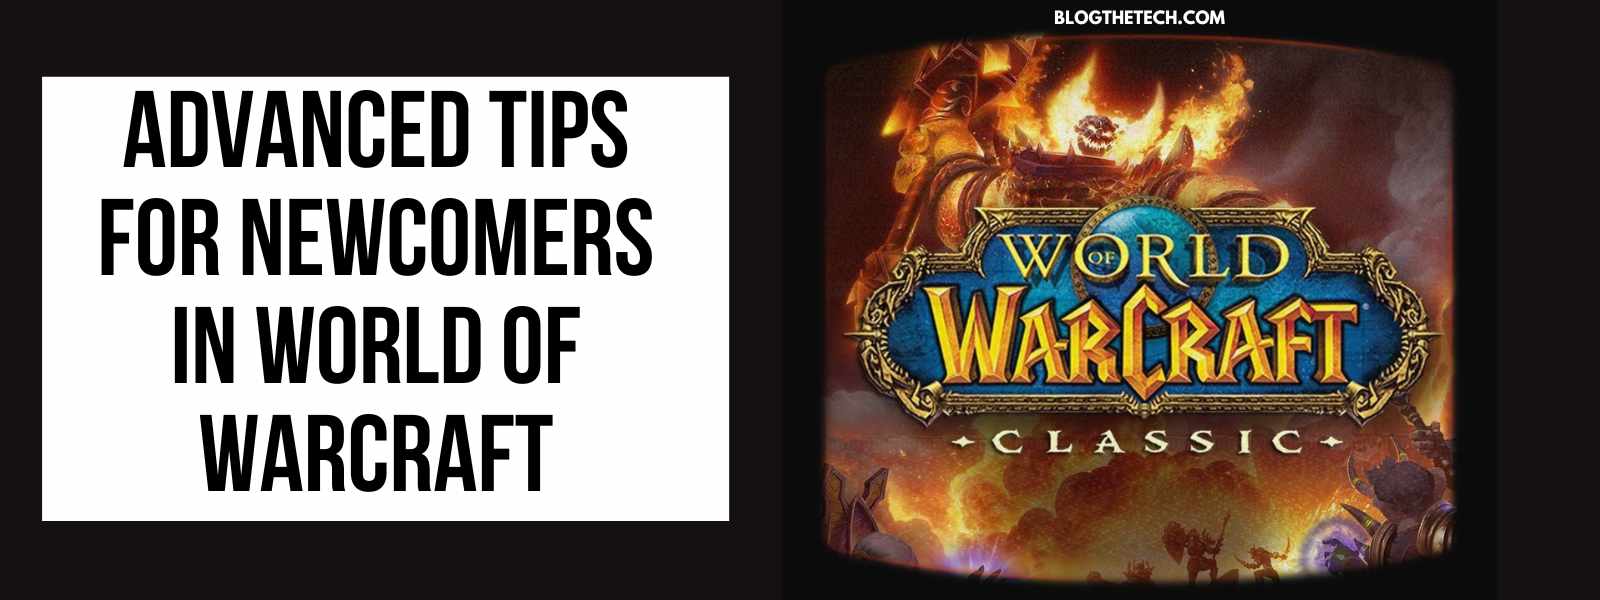 7 Advanced Tips for Newcomers in World of Warcraft